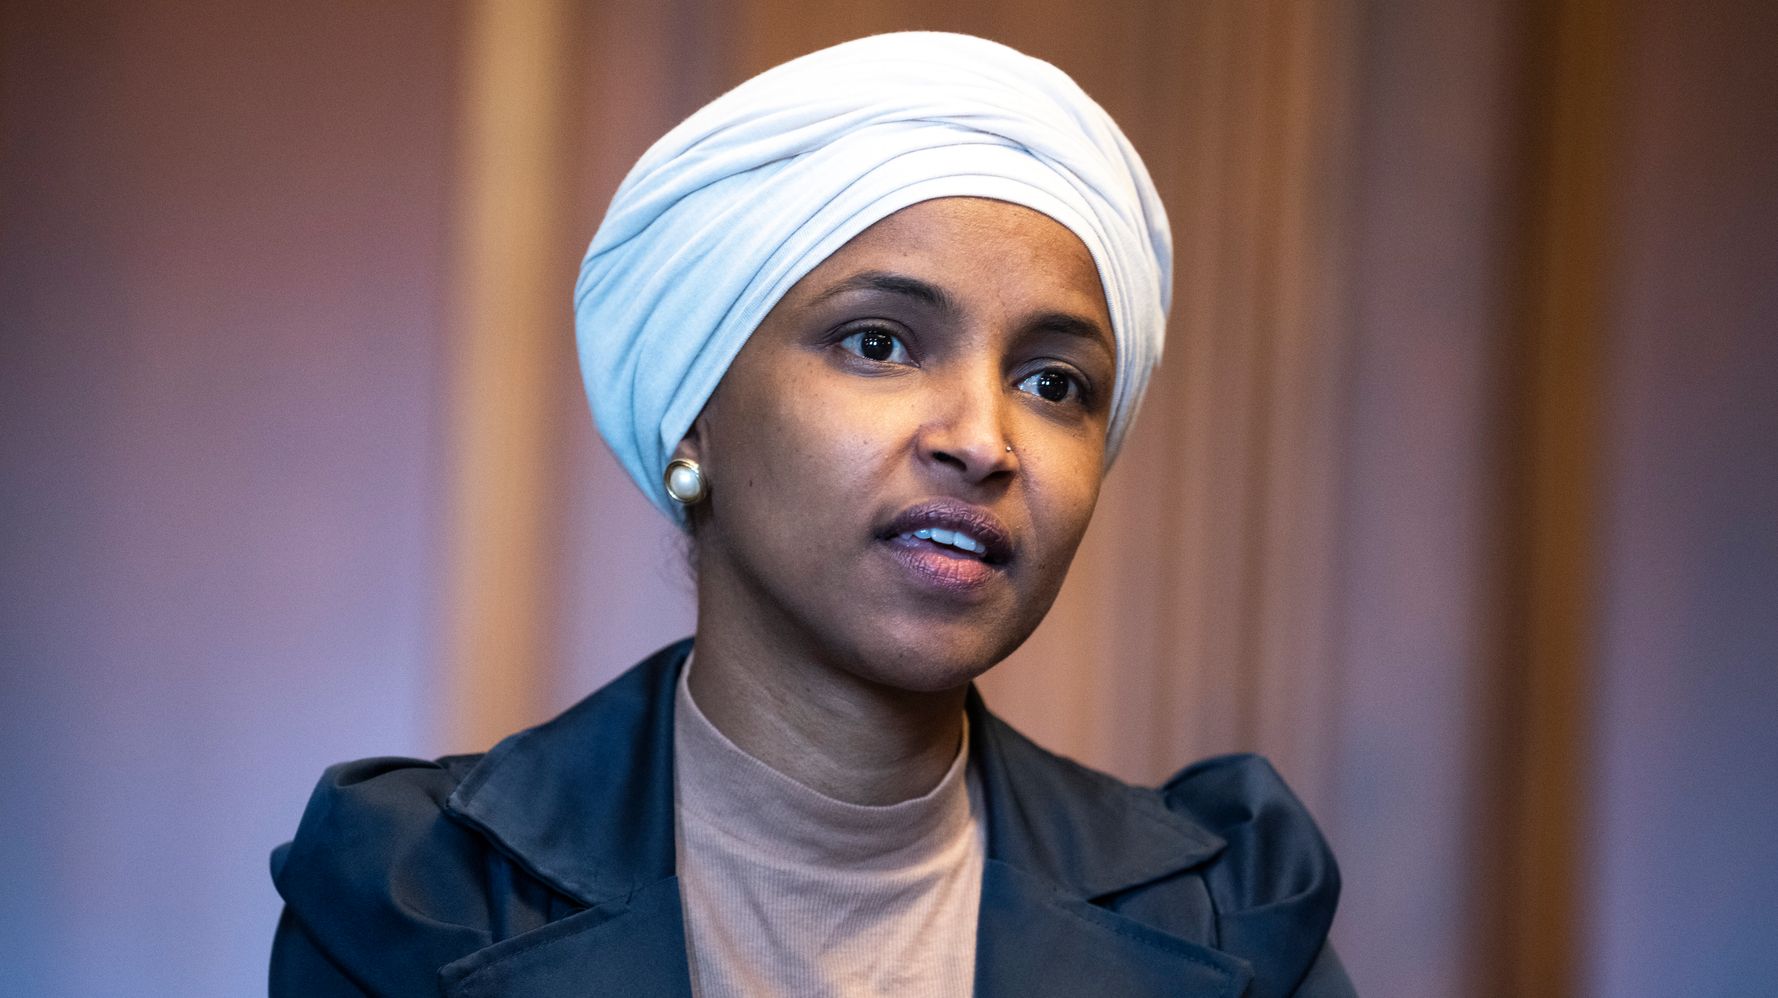 Rep. Ilhan Omar: Accountability For Russia Means Abandoning U.S. 'Hypocrisy'